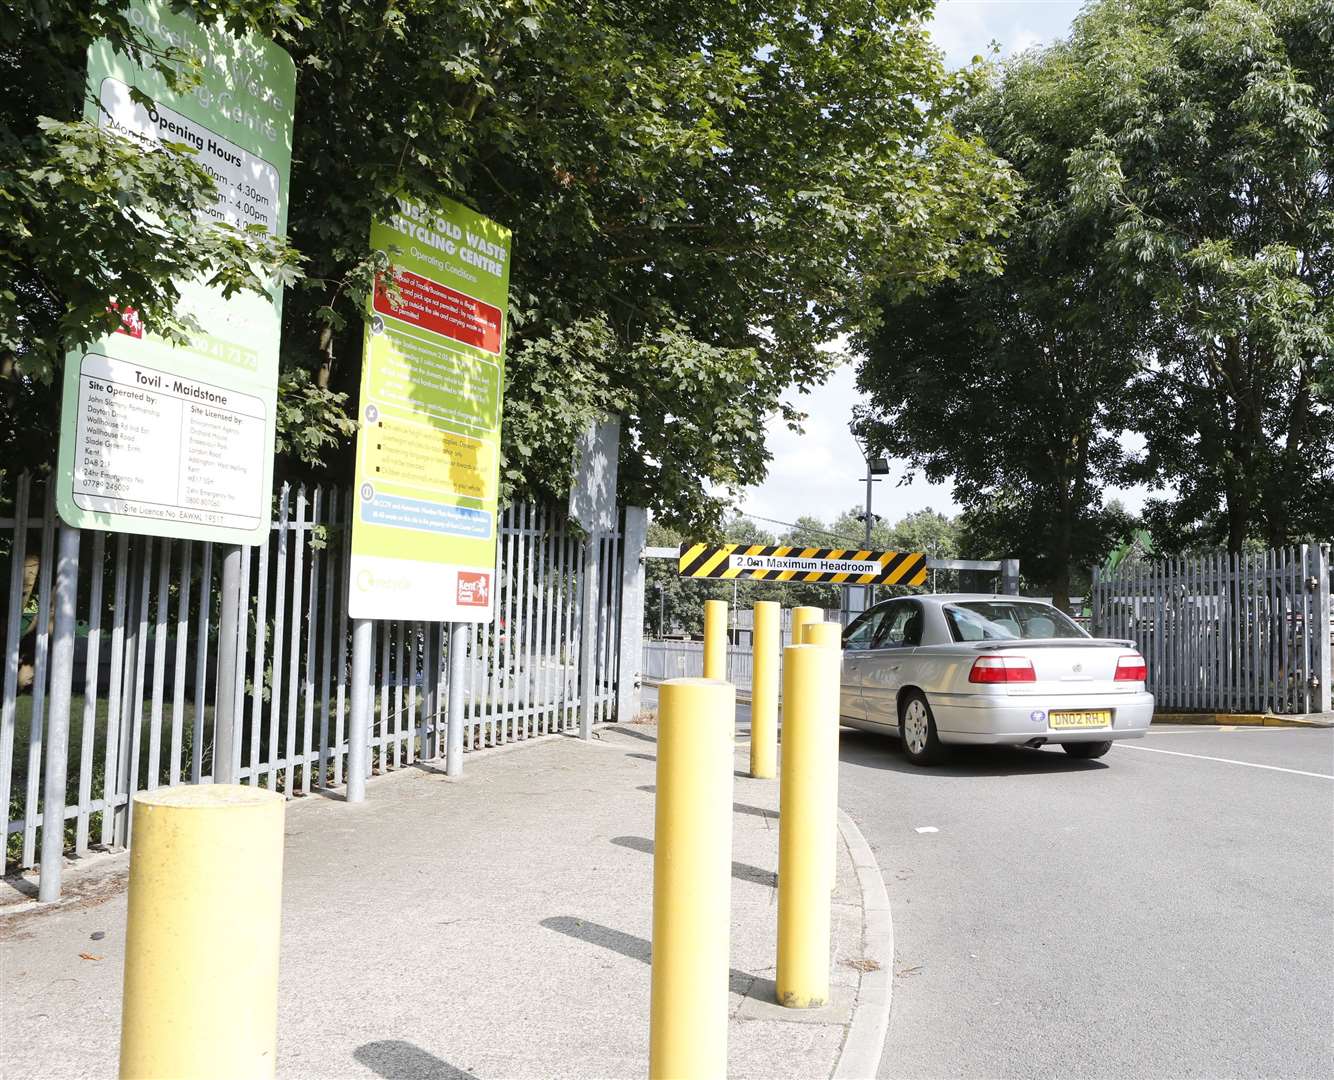 The Tovil Recycling Centre was earmarked for closure